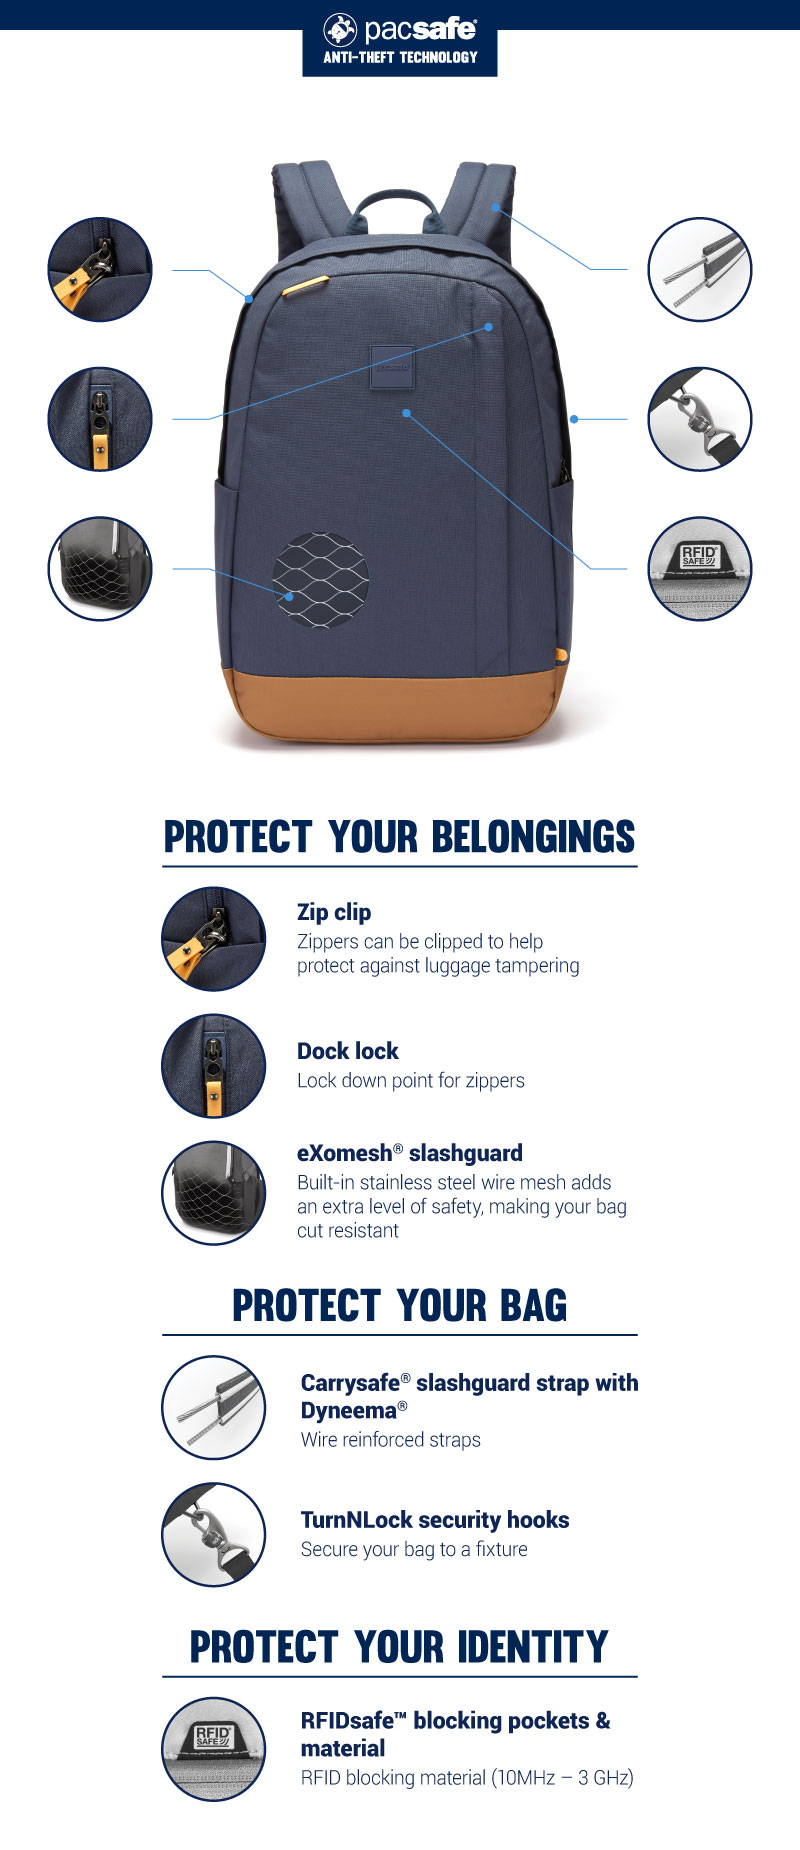 Protect Your Belongings - Zip Clip - Zippers can be clipped to help protect against luggage tempering.
Dock lock - Lock down point for zippers.
eXomesh slashguard - Built-in stainless steel wire mesh adds an extra level of safety, making your bag cut resistant.

Protect Your Bag - Carrysafe slashguard strap with Dyneema - wire reinforced straps.
TurnNLock security hooks - Secure your bag to a fixture.
Protect Your Identity - RFIDsafe blocking pockets & material - RFID blocking material (10 MHz - 3 GHz)